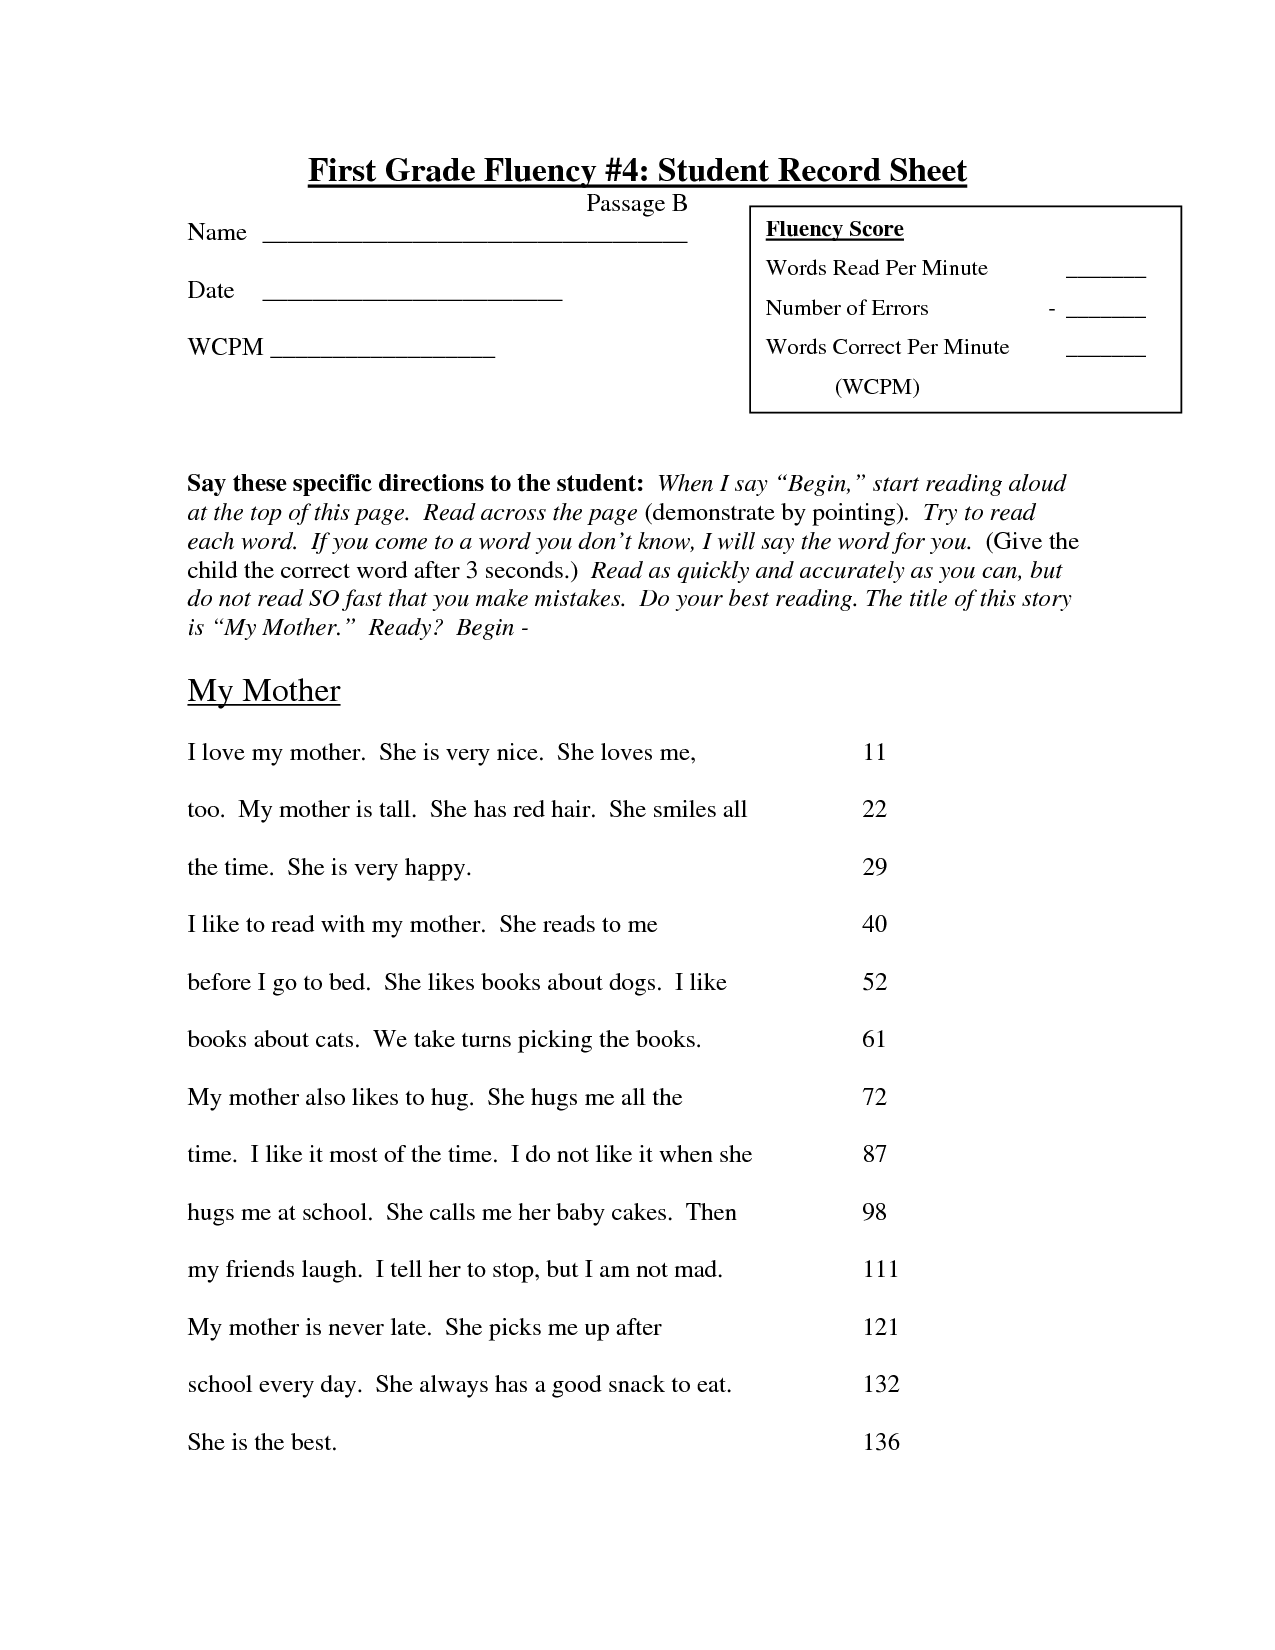 13-best-images-of-4th-grade-fluency-worksheets-4th-grade-reading